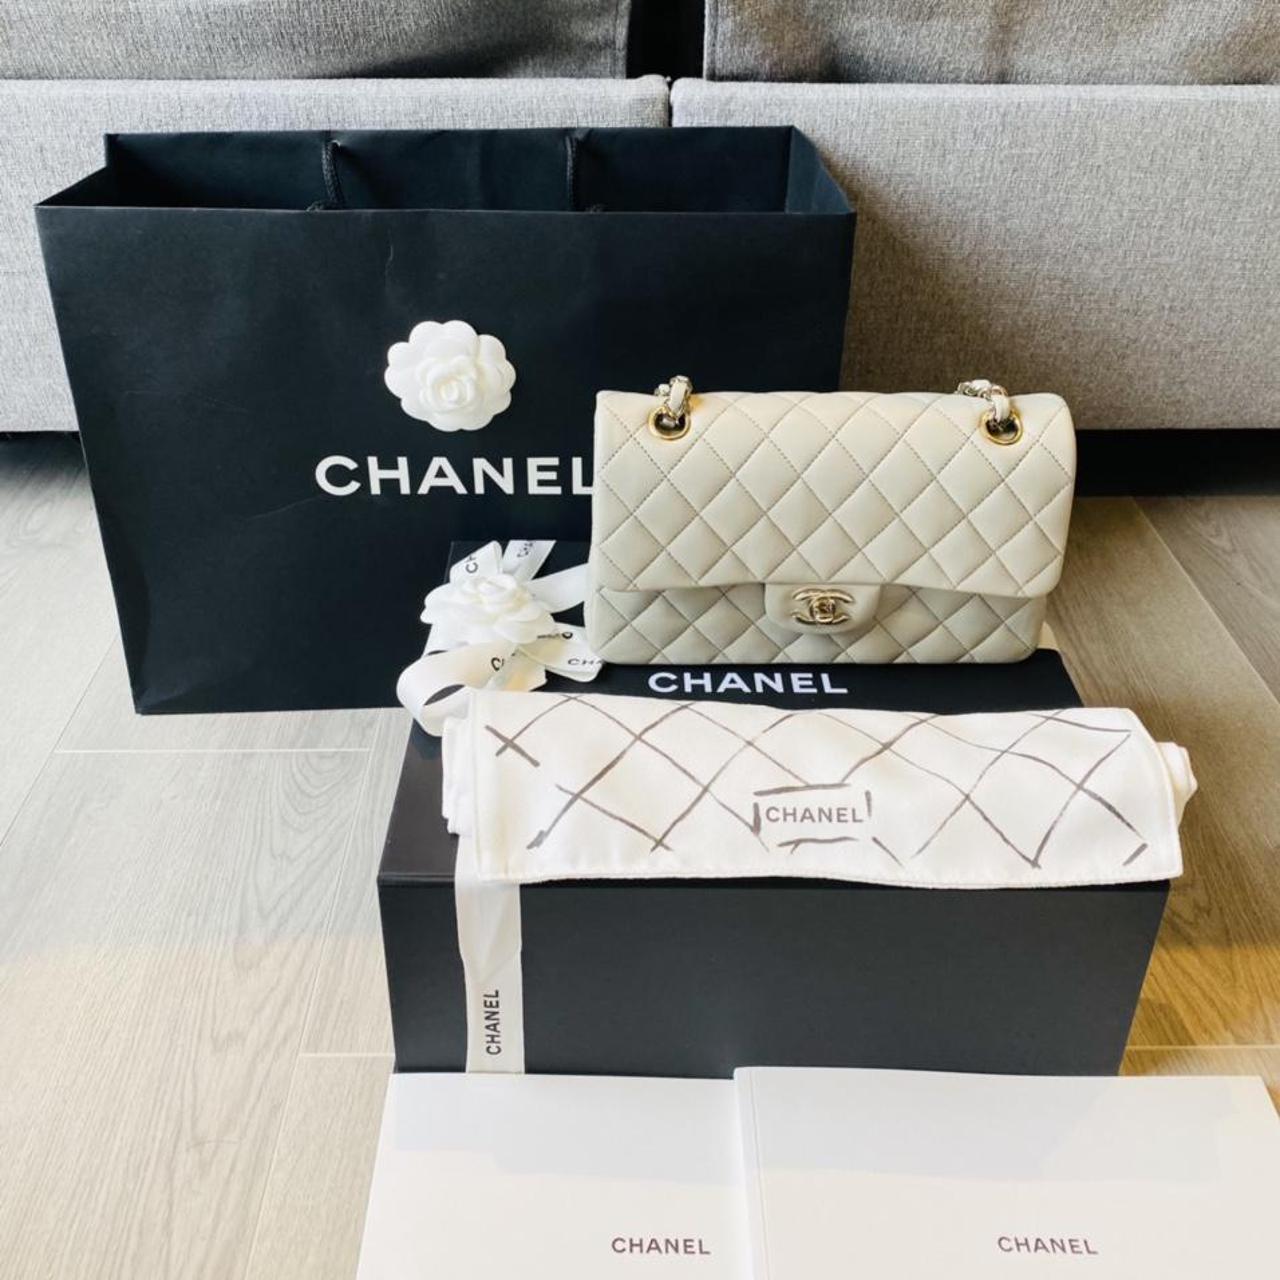 Chanel Women's Cream and Gold Bag